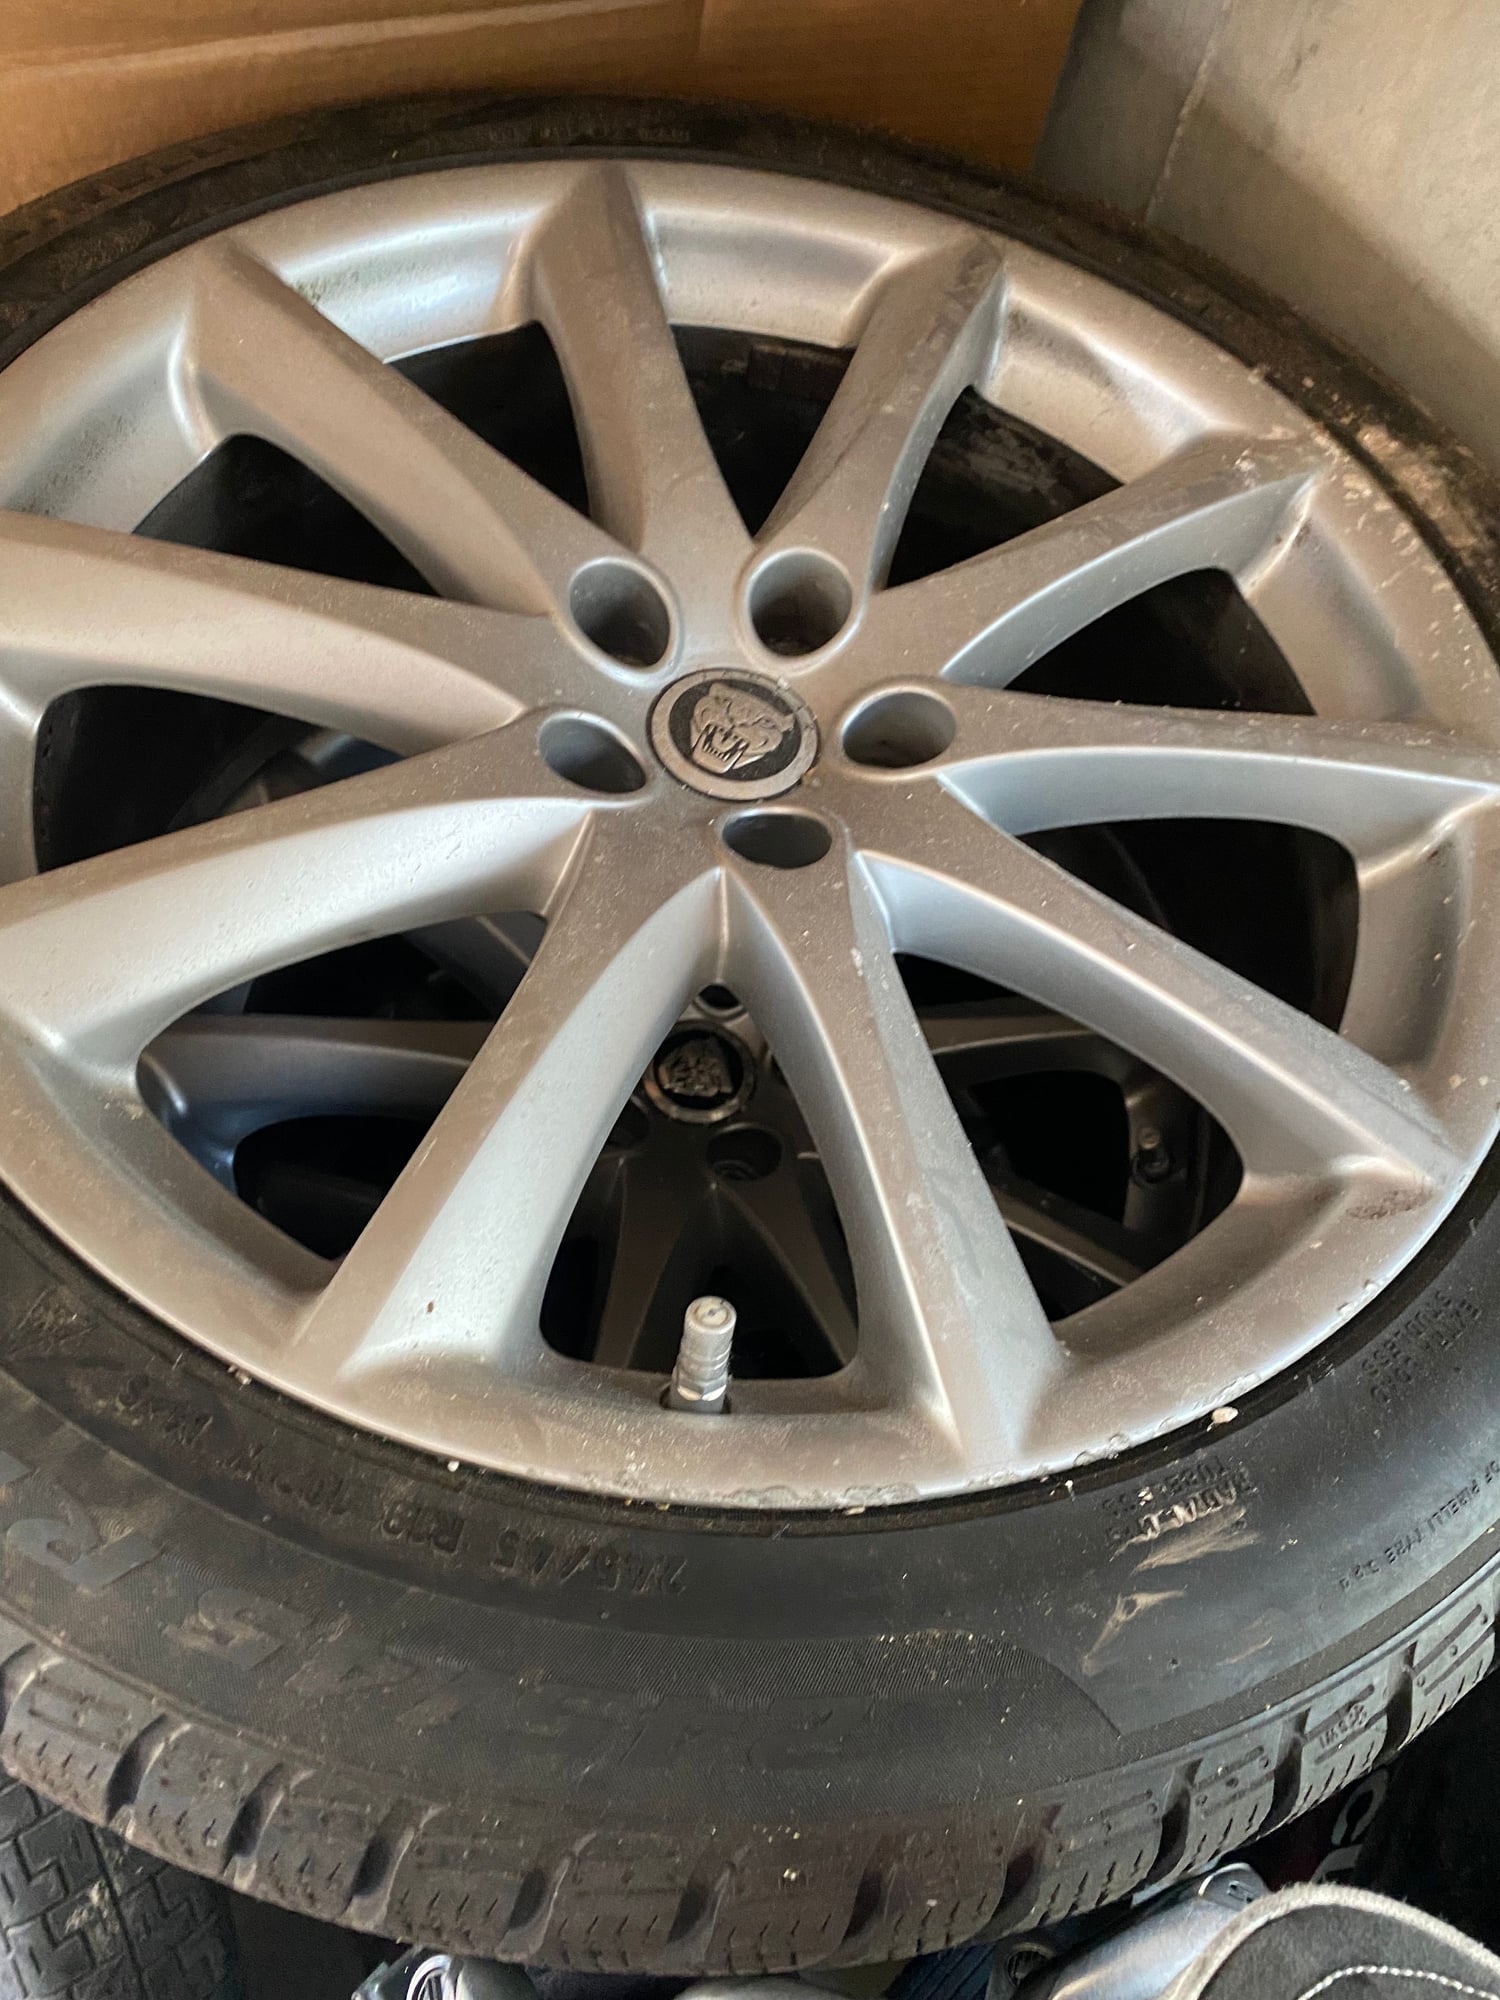 Wheels and Tires/Axles - Rims with winter tires and tpms - Used - 2010 to 2021 Jaguar All Models - Long Beach, NY 11561, United States